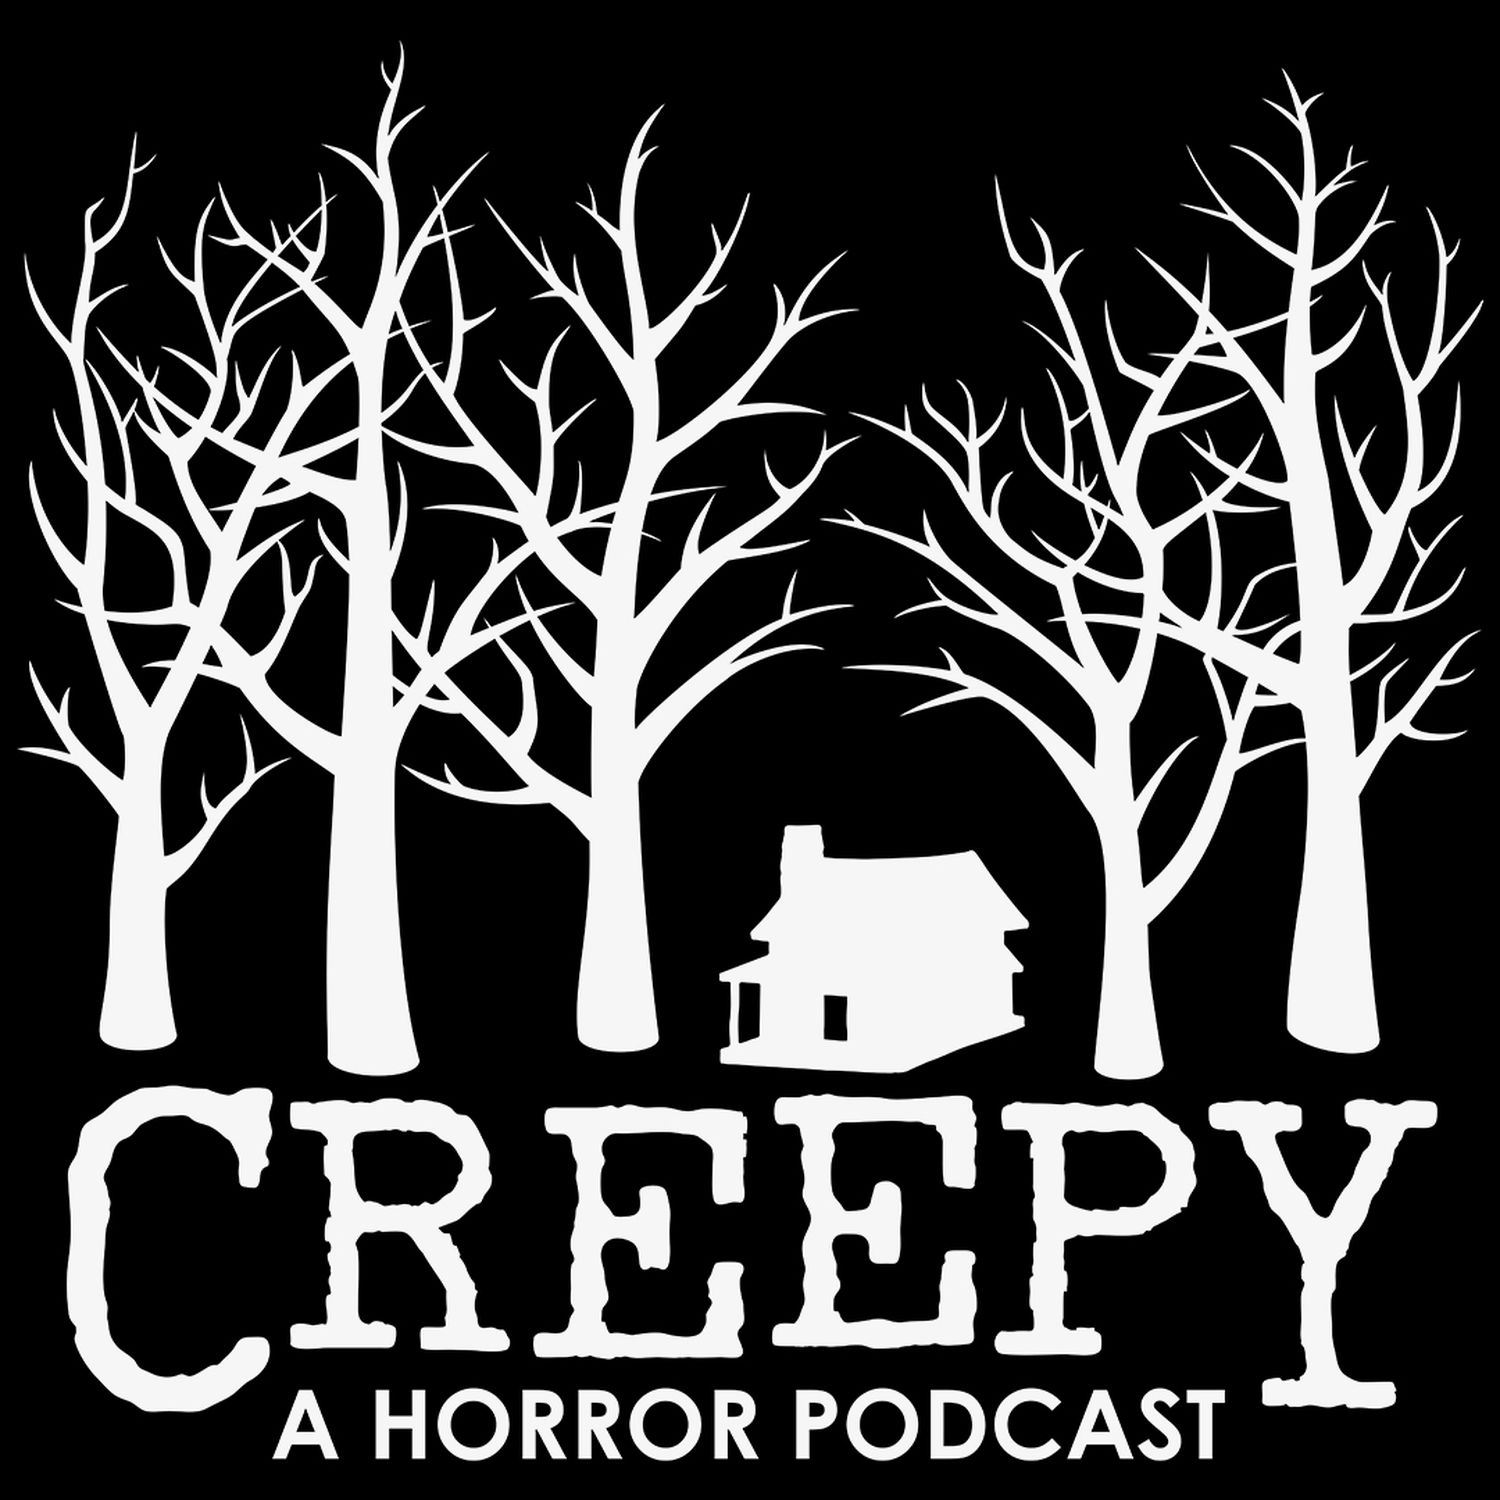 Cover art for the Creepy podcast featuring a house illustration in the woods.
